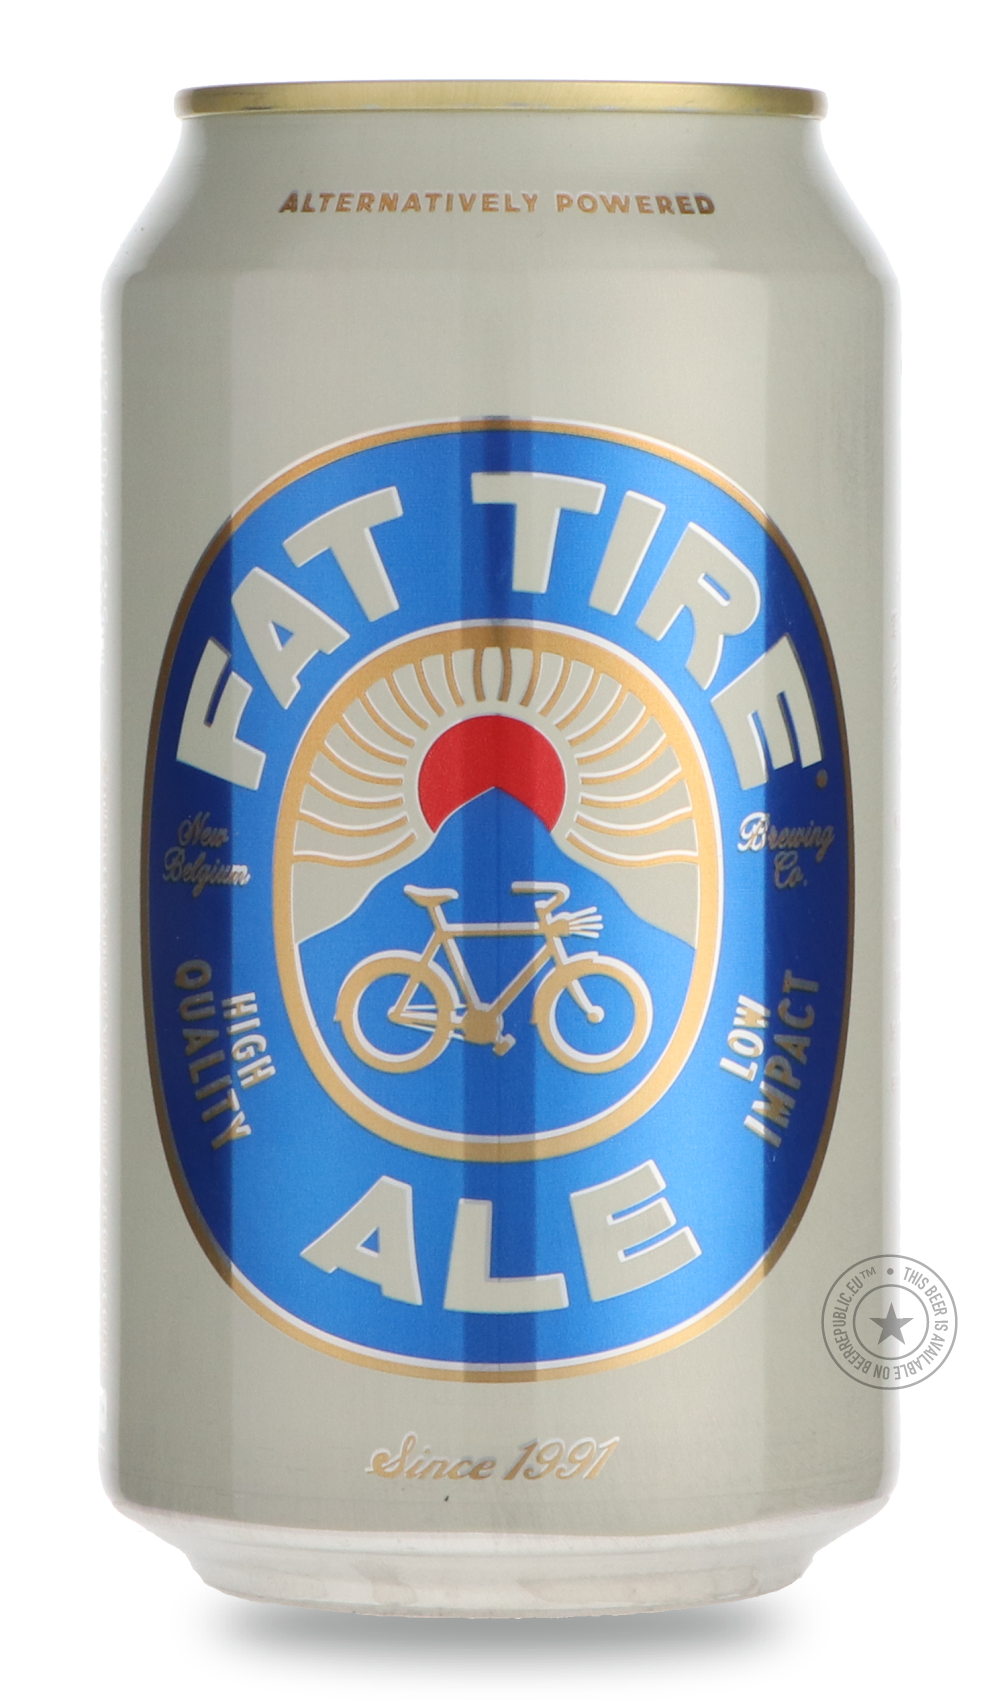 -New Belgium- Fat Tire-Pale- Only @ Beer Republic - The best online beer store for American & Canadian craft beer - Buy beer online from the USA and Canada - Bier online kopen - Amerikaans bier kopen - Craft beer store - Craft beer kopen - Amerikanisch bier kaufen - Bier online kaufen - Acheter biere online - IPA - Stout - Porter - New England IPA - Hazy IPA - Imperial Stout - Barrel Aged - Barrel Aged Imperial Stout - Brown - Dark beer - Blond - Blonde - Pilsner - Lager - Wheat - Weizen - Amber - Barley Wi